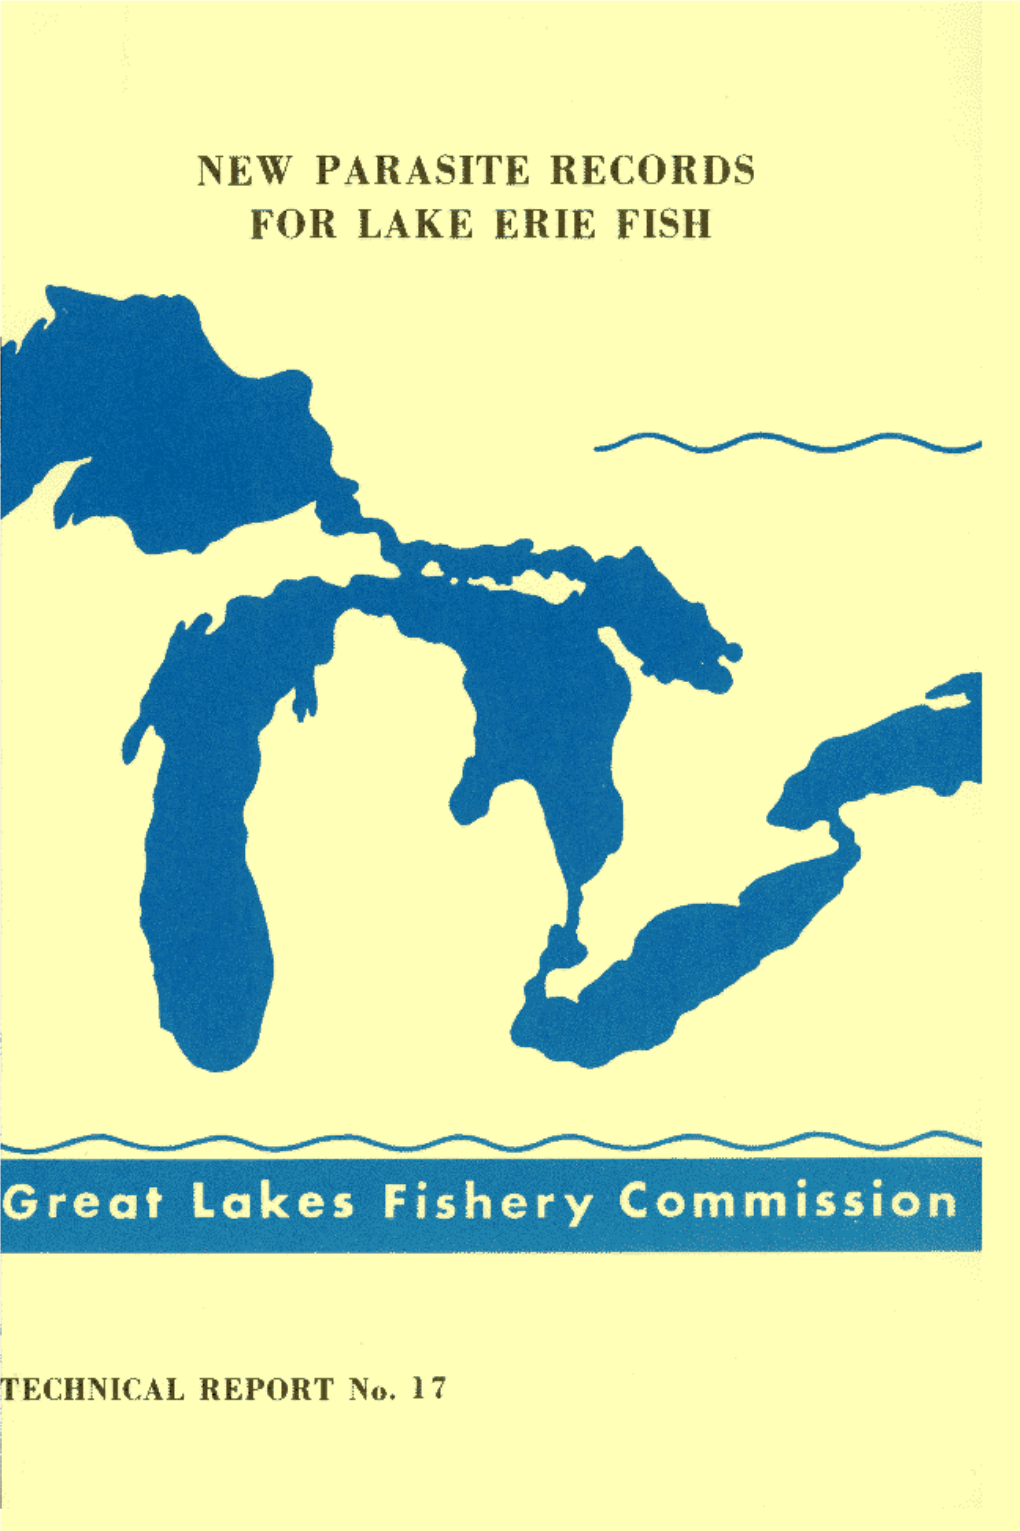 New Parasite Records for Lake Erie Fish